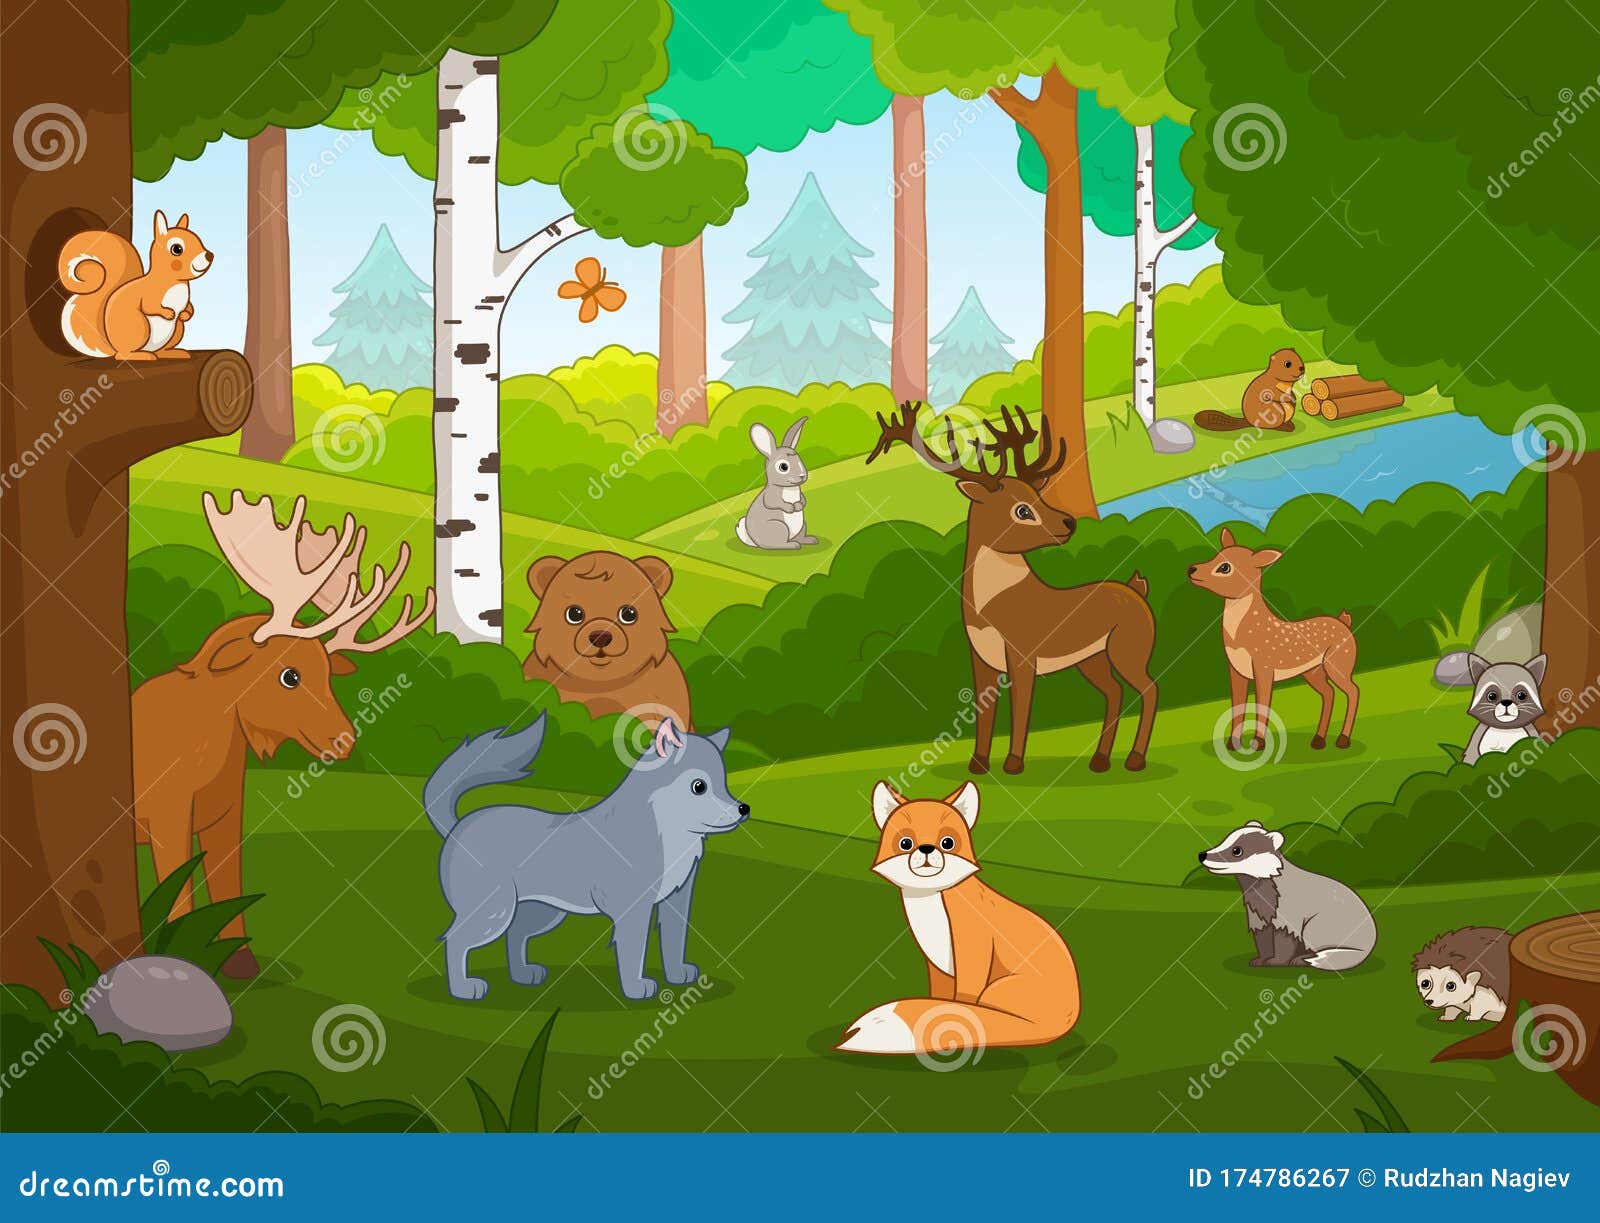 Various Cartoon Animals in the Forest Stock Vector - Illustration of funny,  character: 174786267